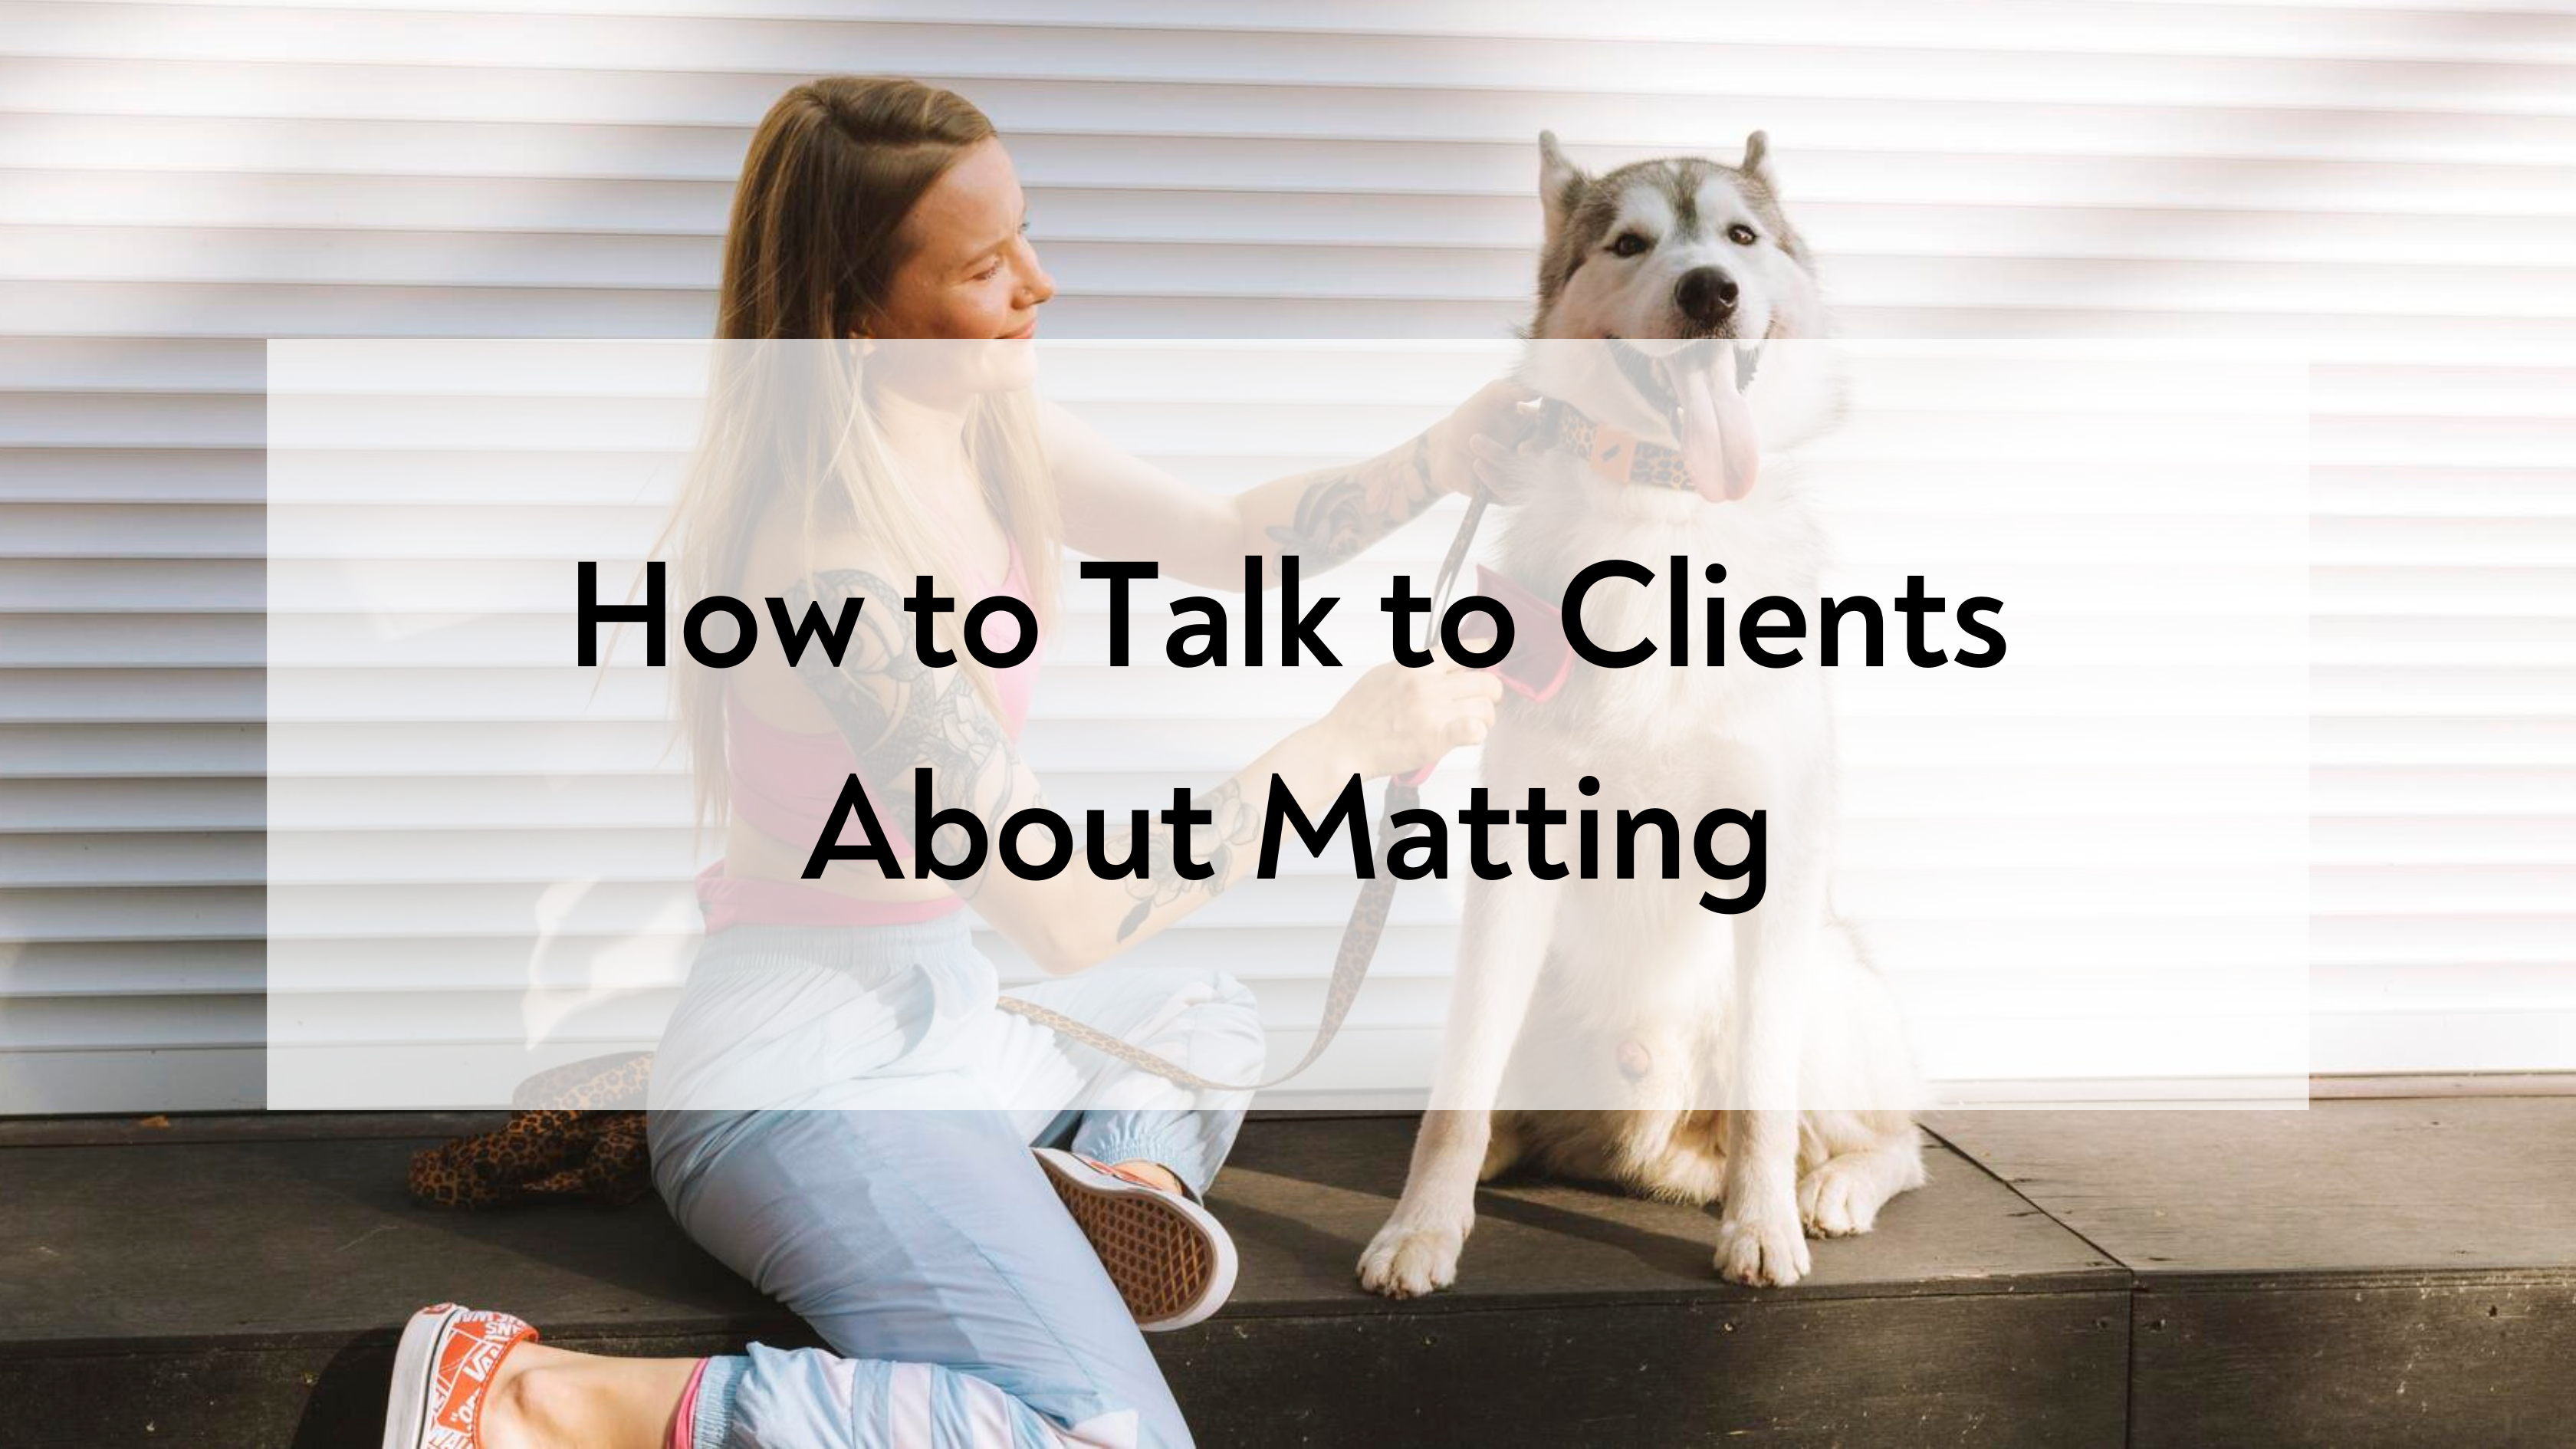 How to Talk to Clients About Matting